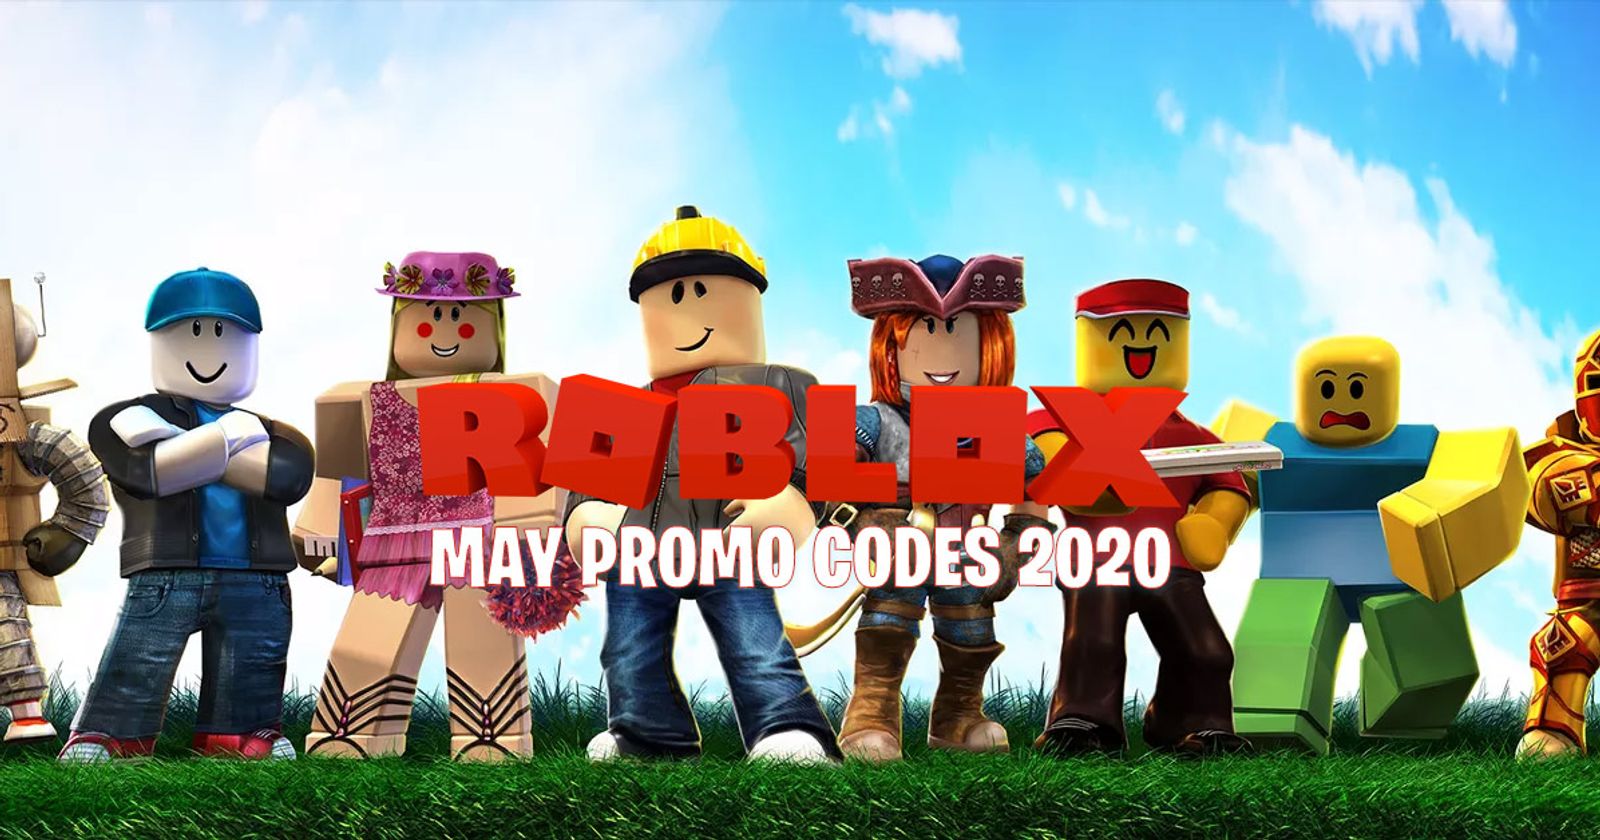 Roblox May 2020 Promo Codes: How to Redeem, Earn FREE Robux and More!